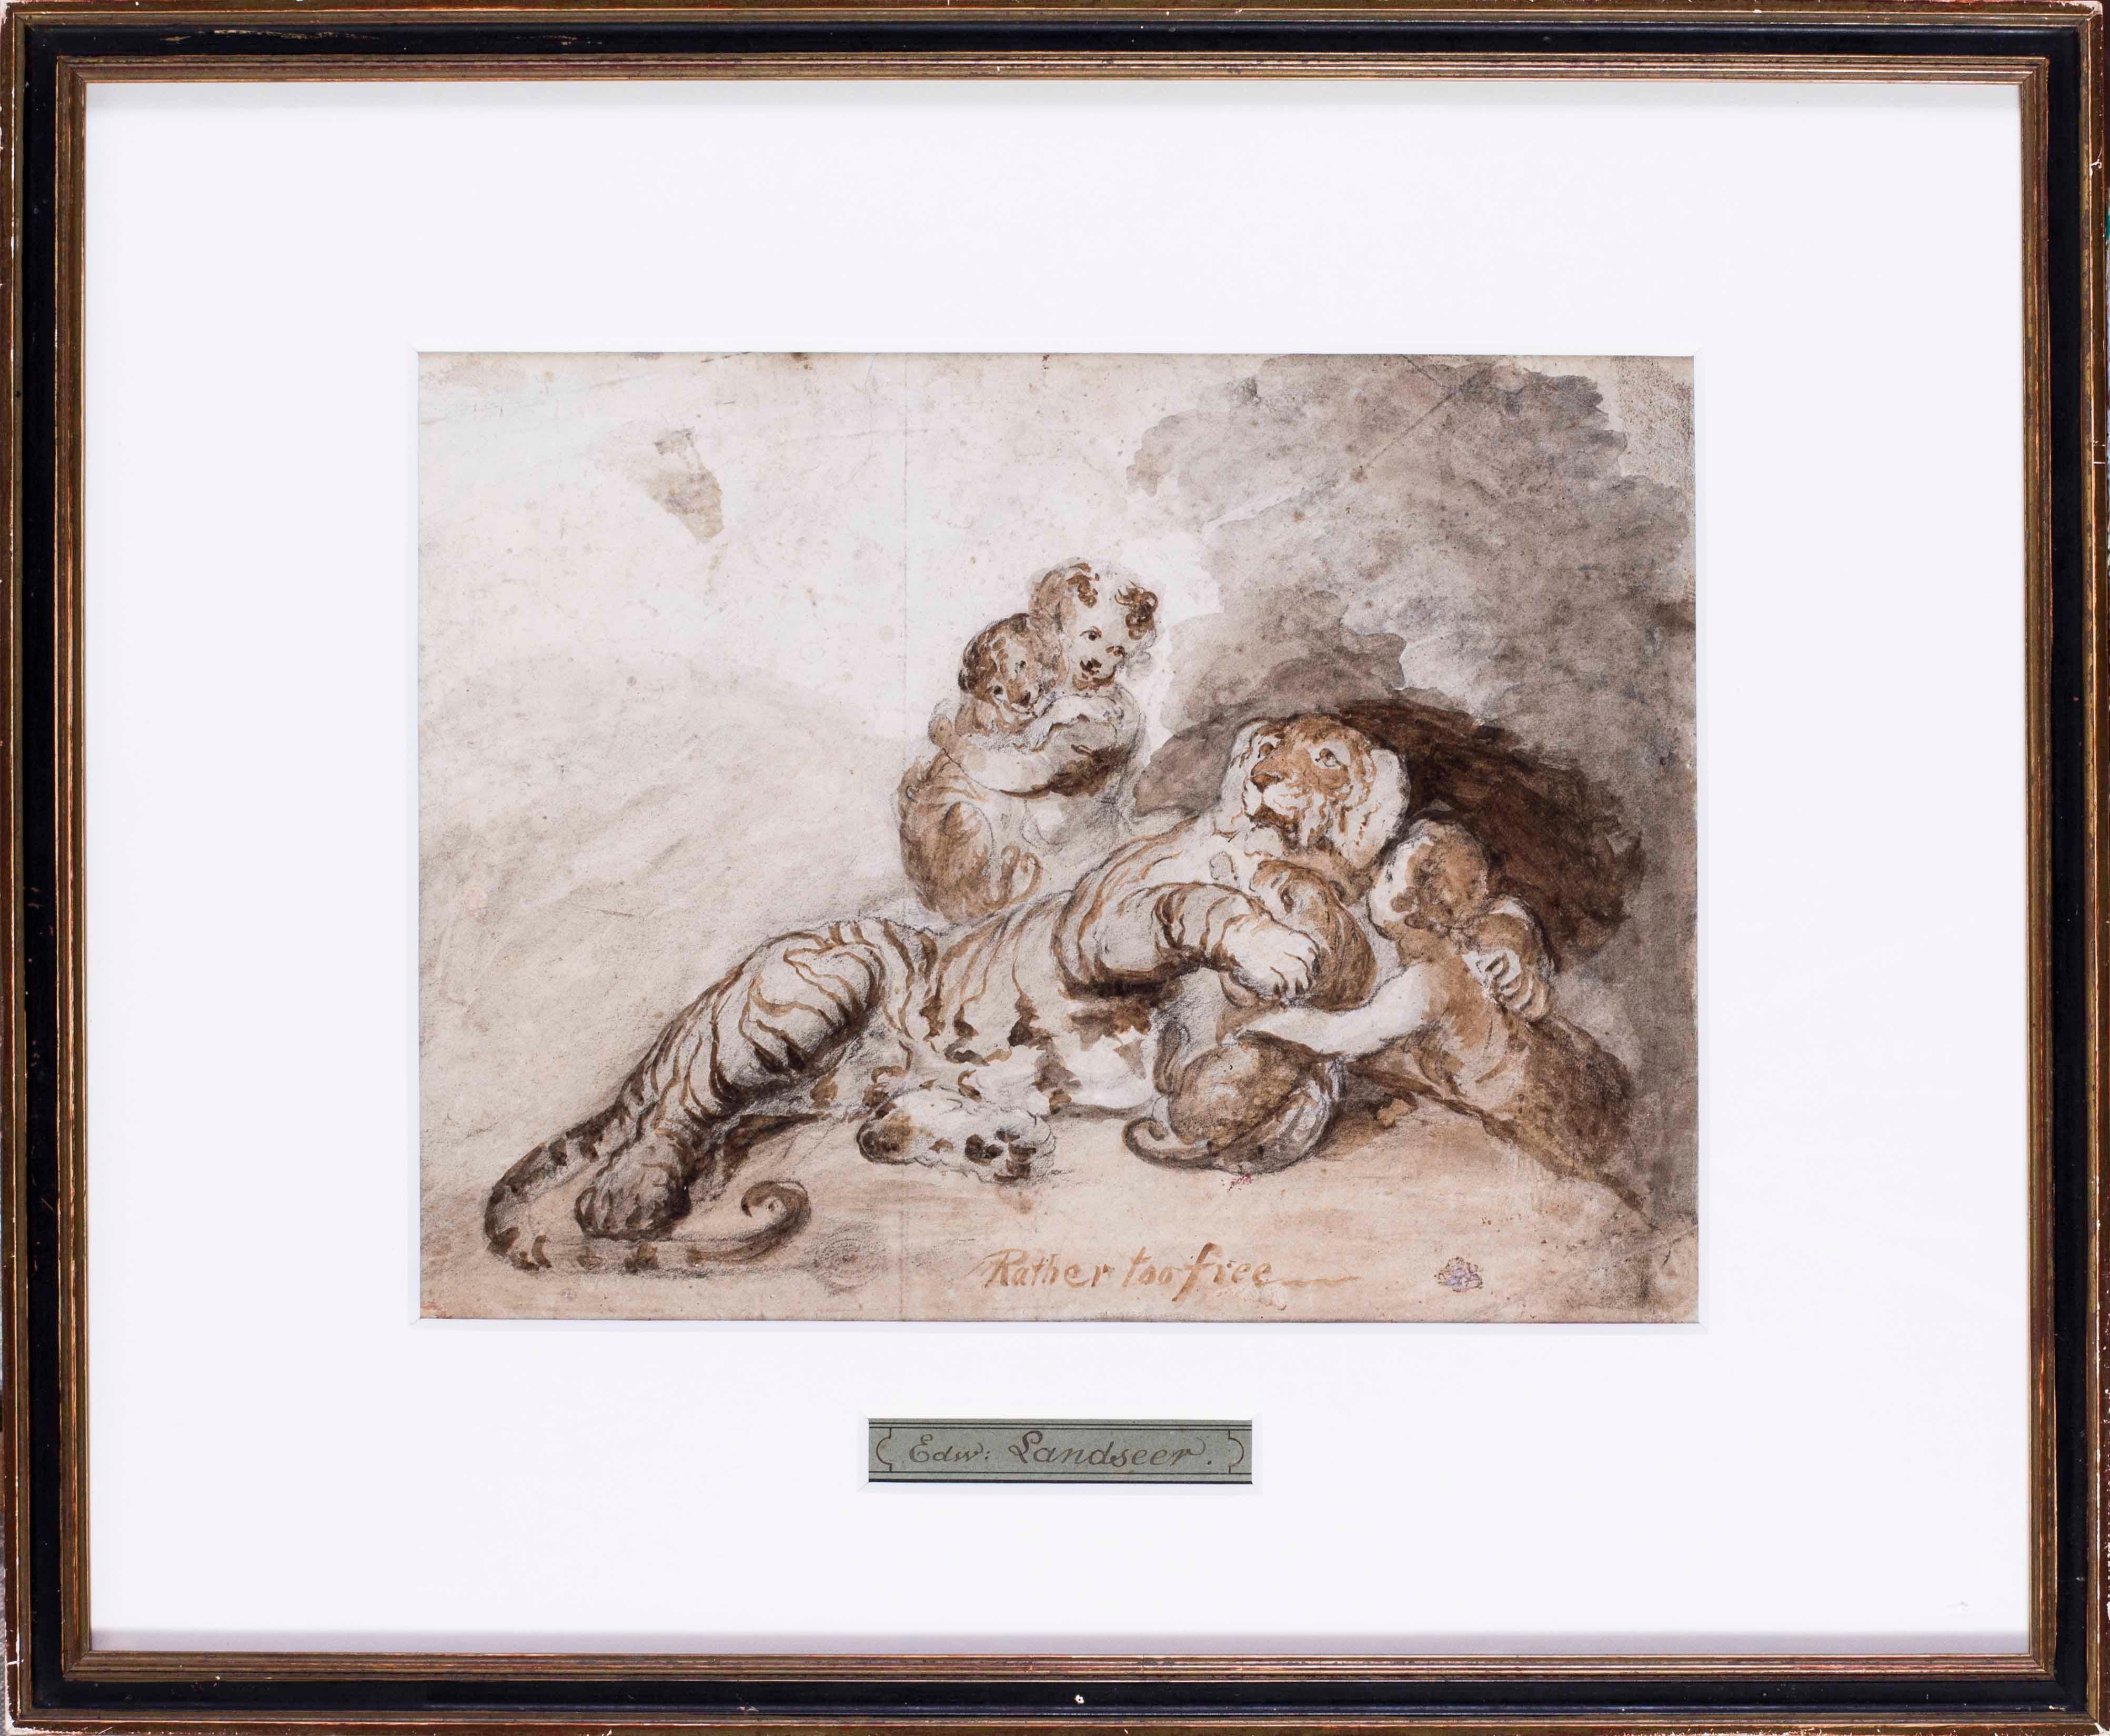 Attributed to Sir Edwin Henry Landseer  Animal Art - 19th Century British drawing of a tiger, cubs and child attributed to Landseer